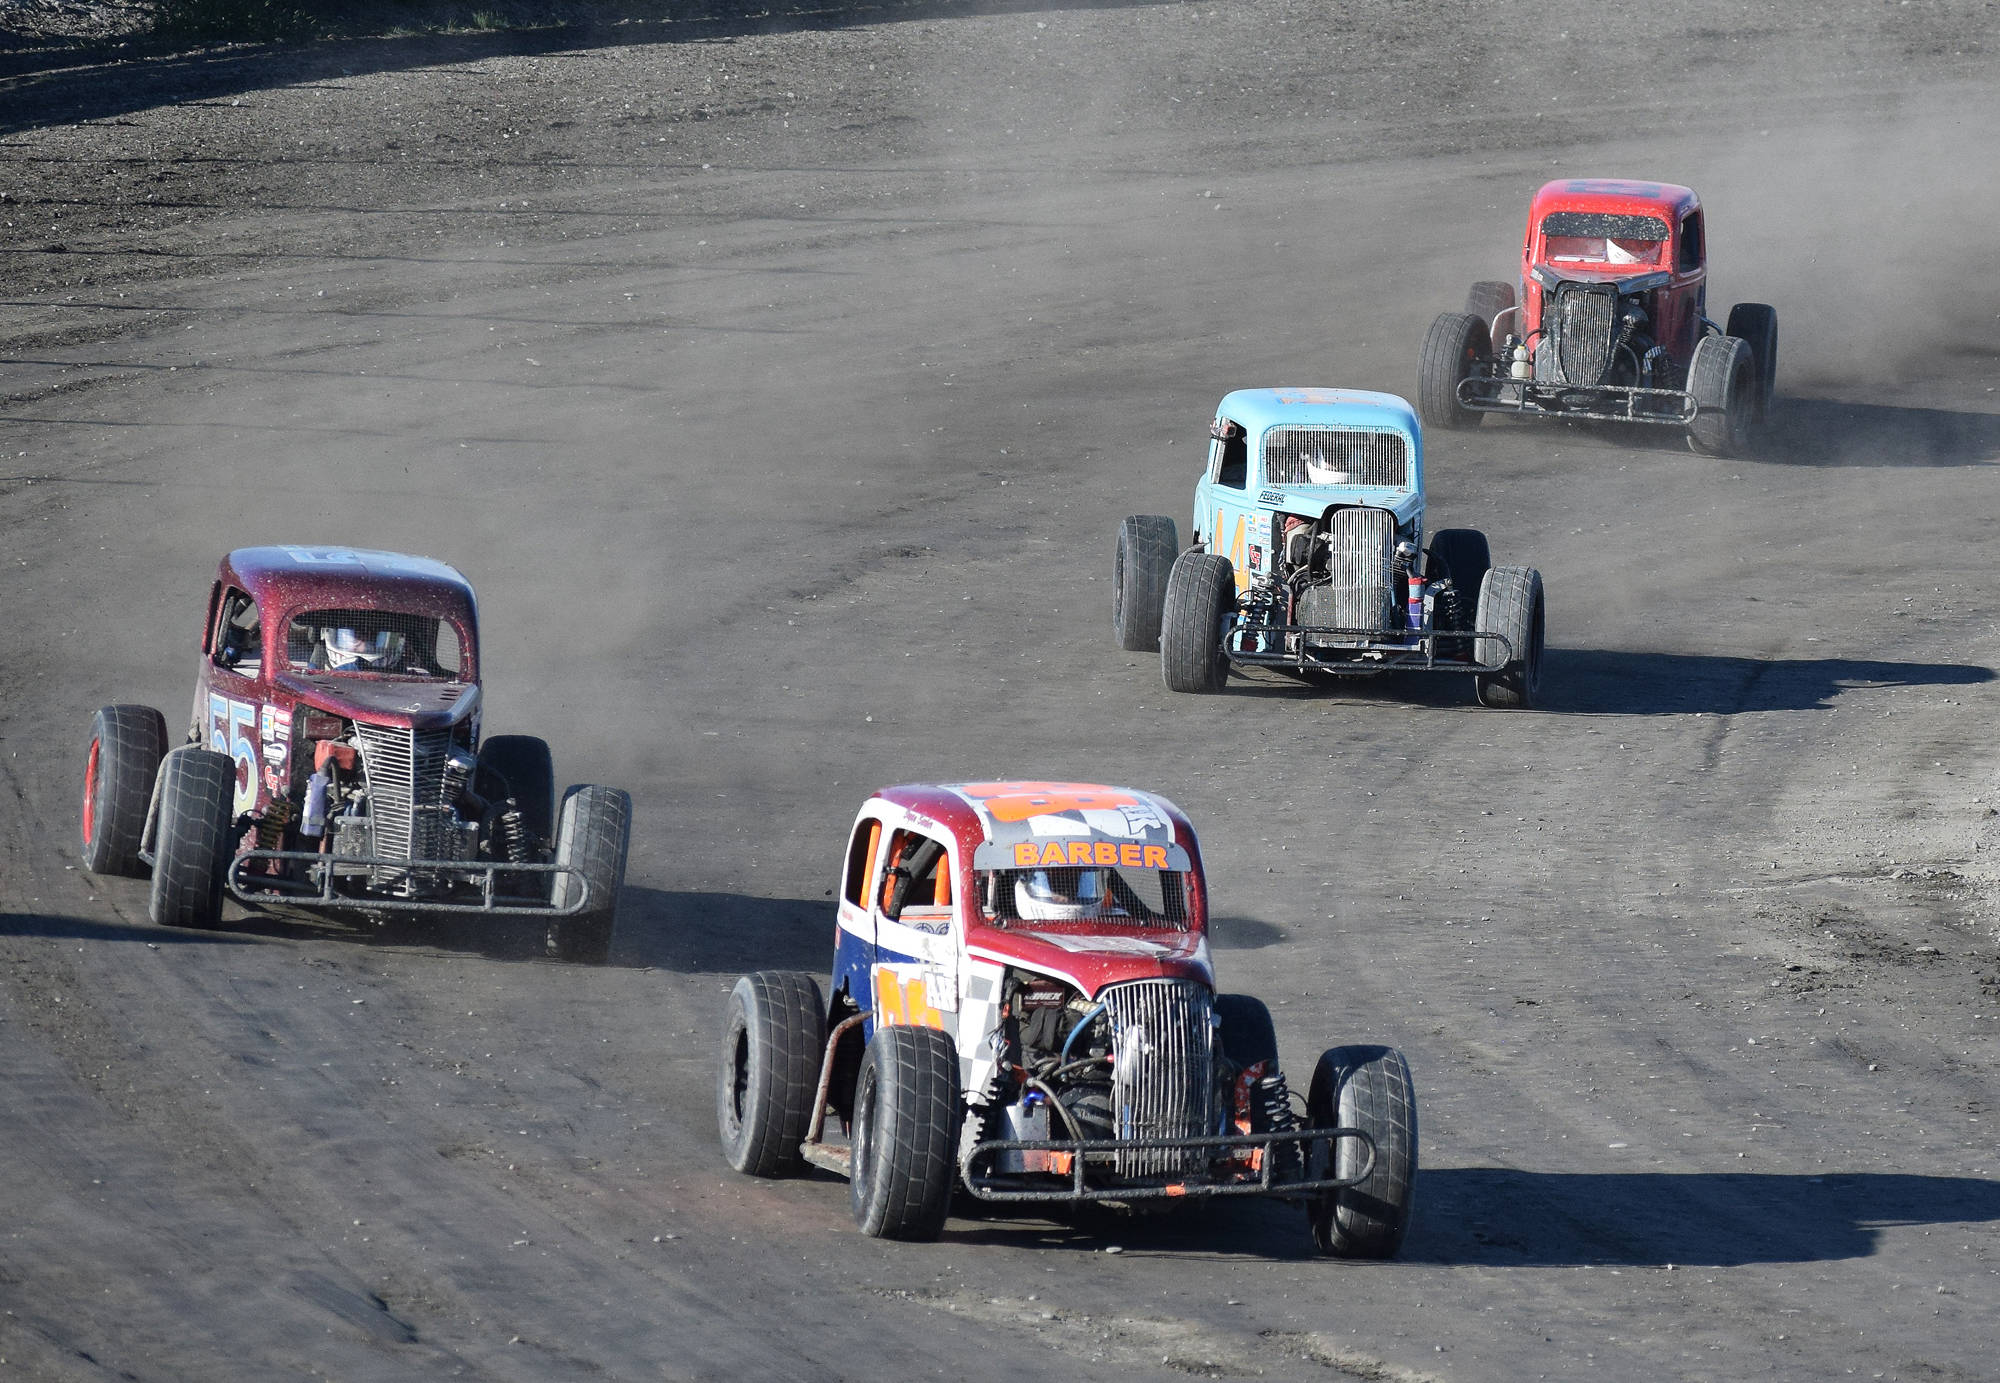 Bryan Barber leads a pack of Legend cars, including David Kusmider (second), Ty Torkelson (third) and Robert Spokes, Saturday night at Twin City Raceway in Kenai. (Photo by Joey Klecka/Peninsula Clarion)